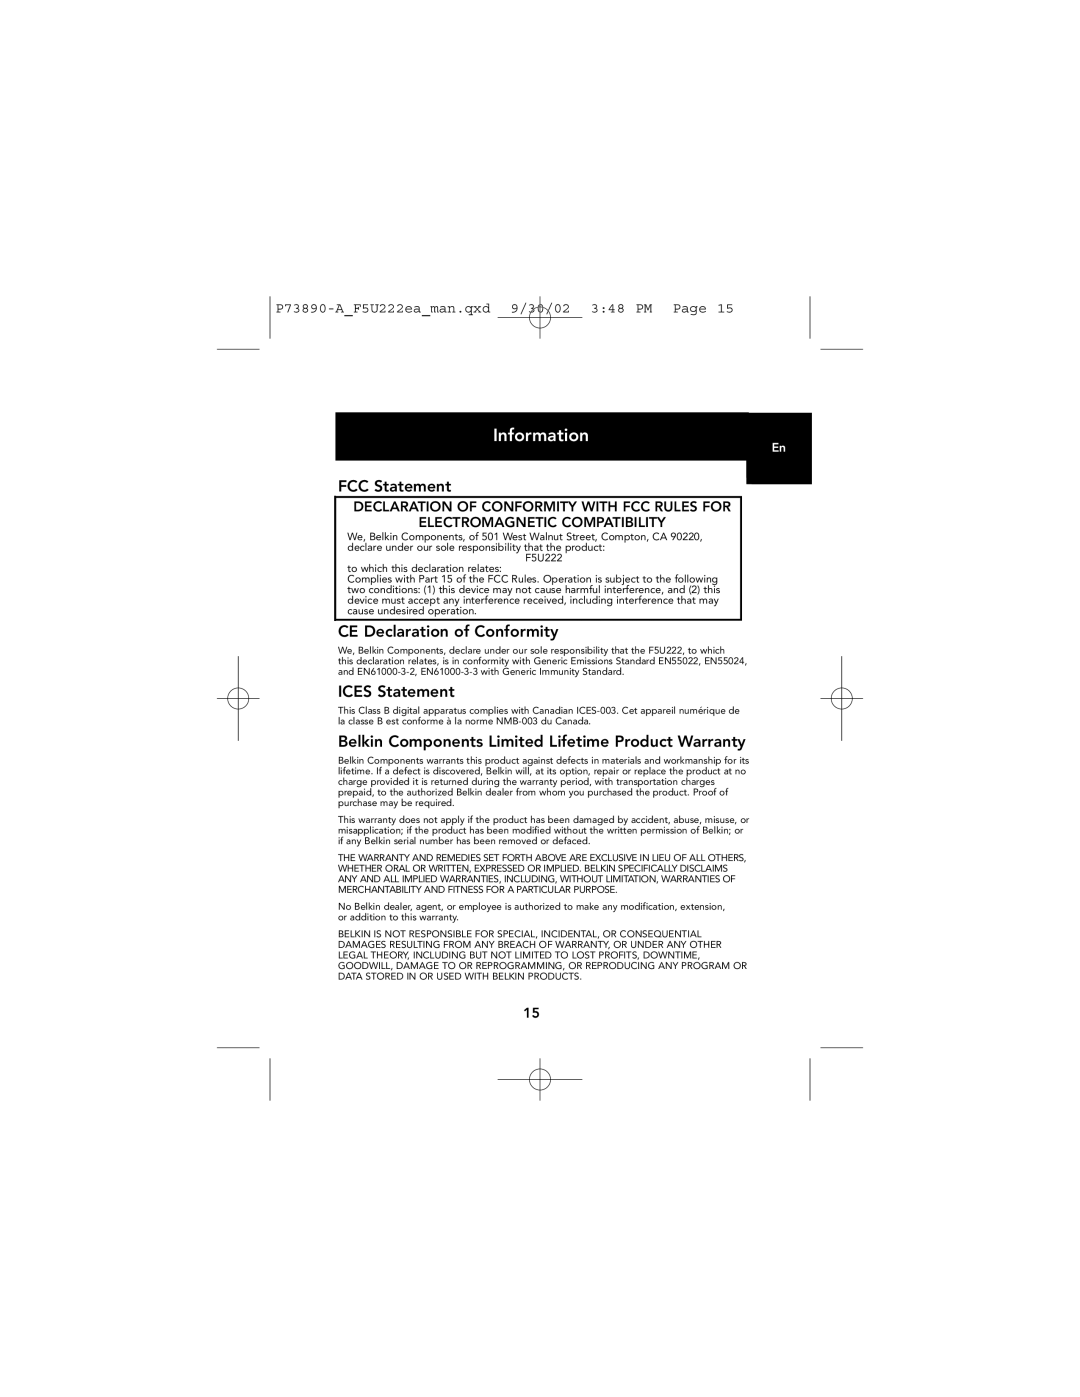 Belkin P73890EA-A manual Information, FCC Statement, CE Declaration of Conformity, ICES Statement 